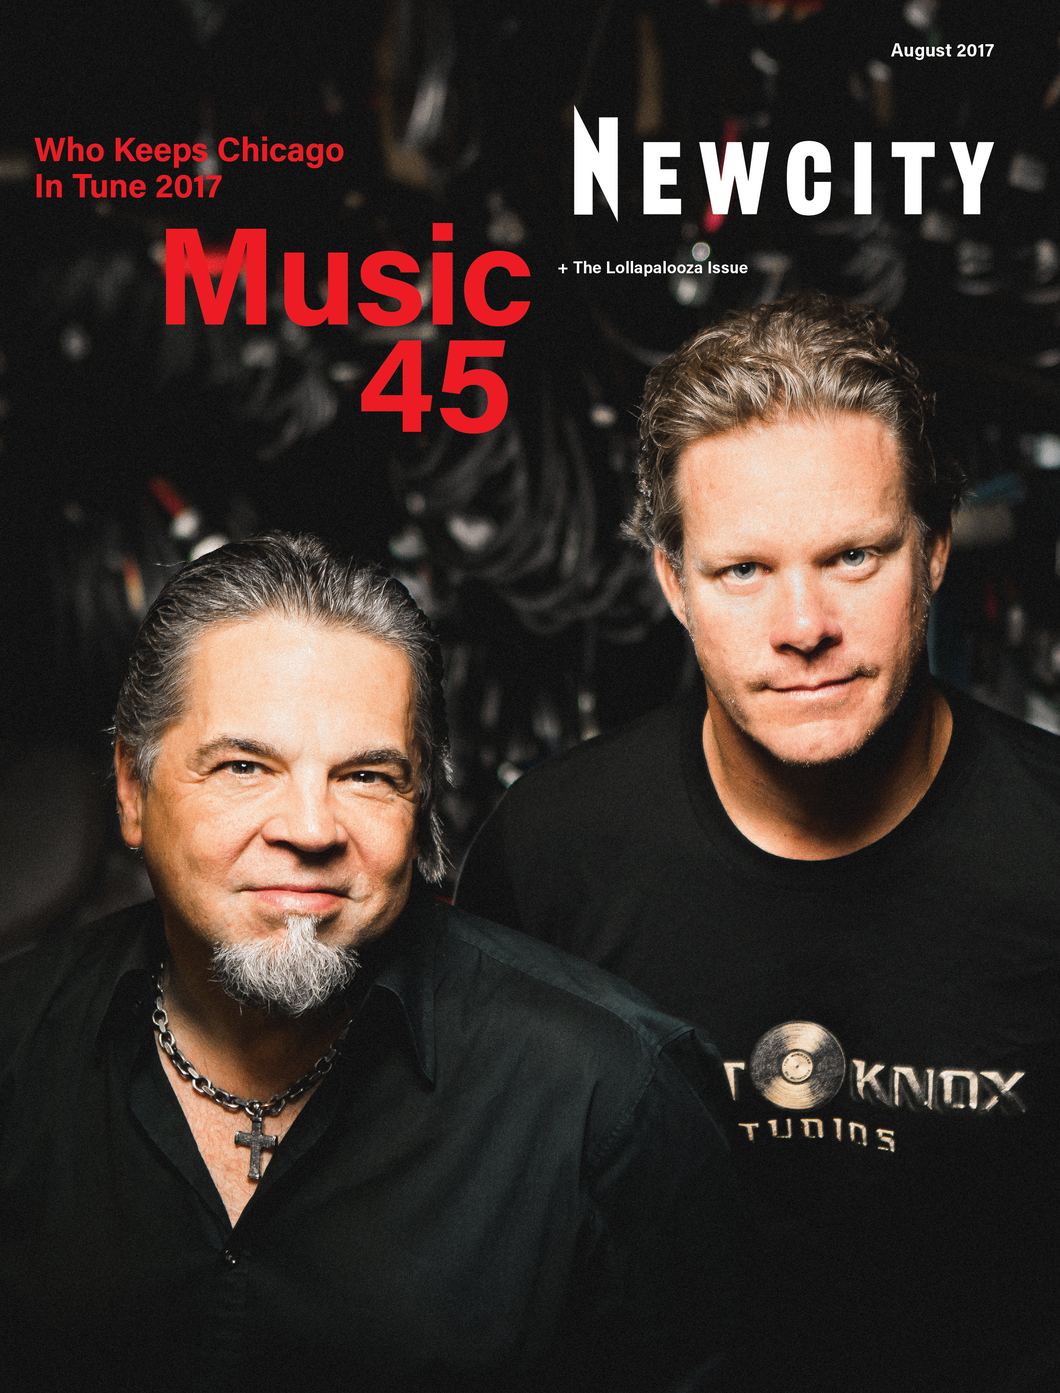 August 2017 Issue: Music 45